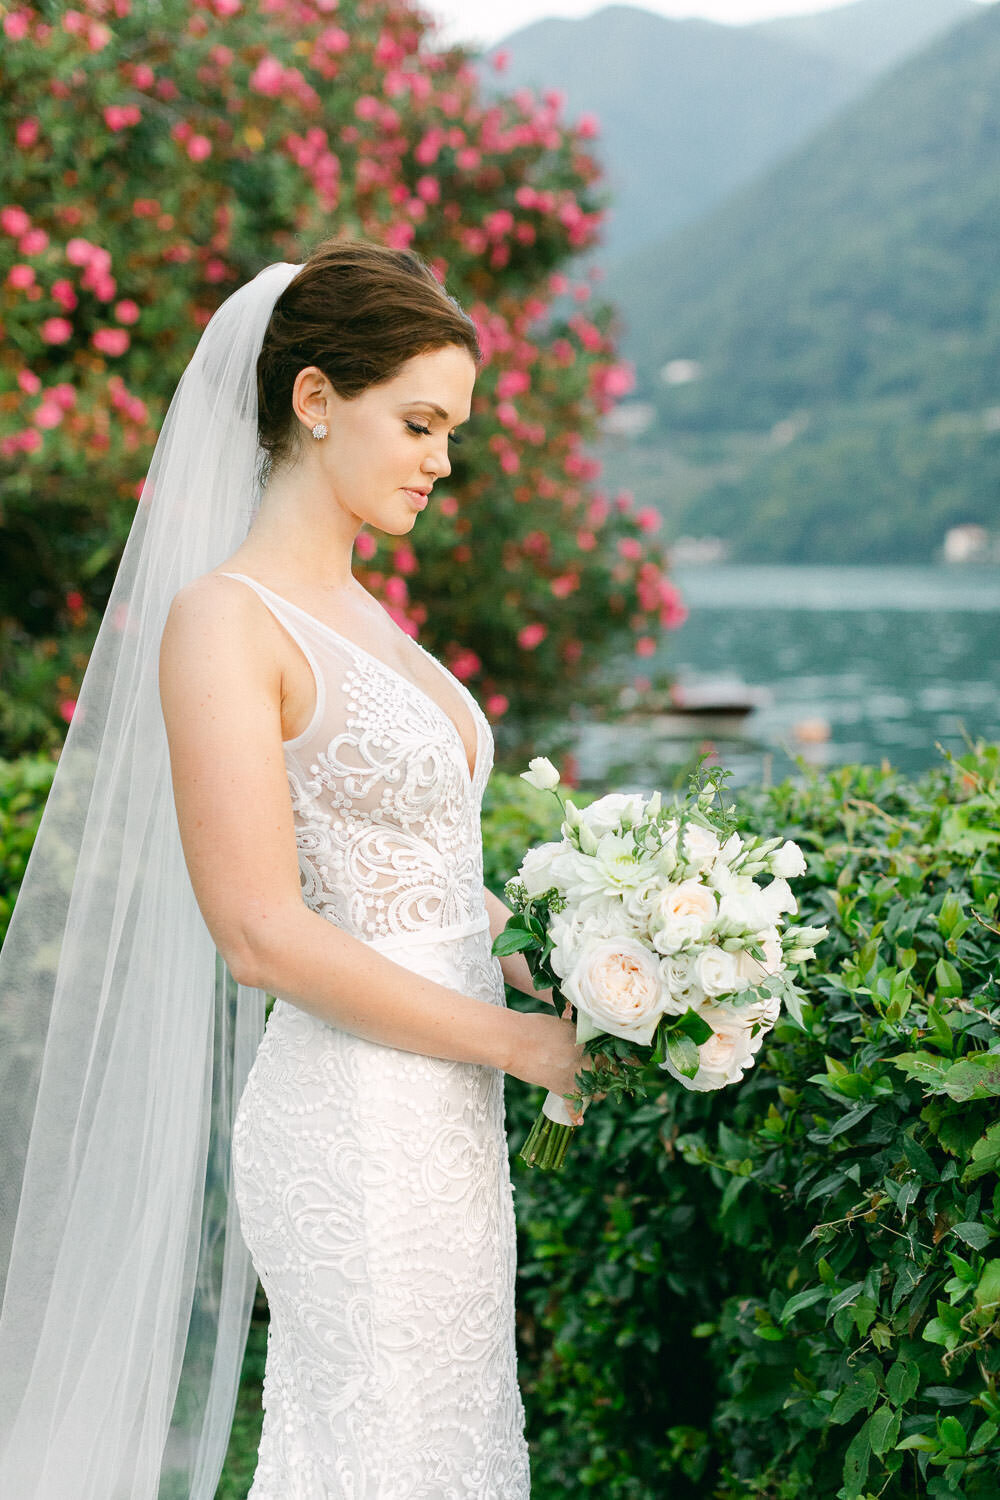 Bride in white lace bridal dress and veil holding white floral bouquet by Lake Como Wedding Italy